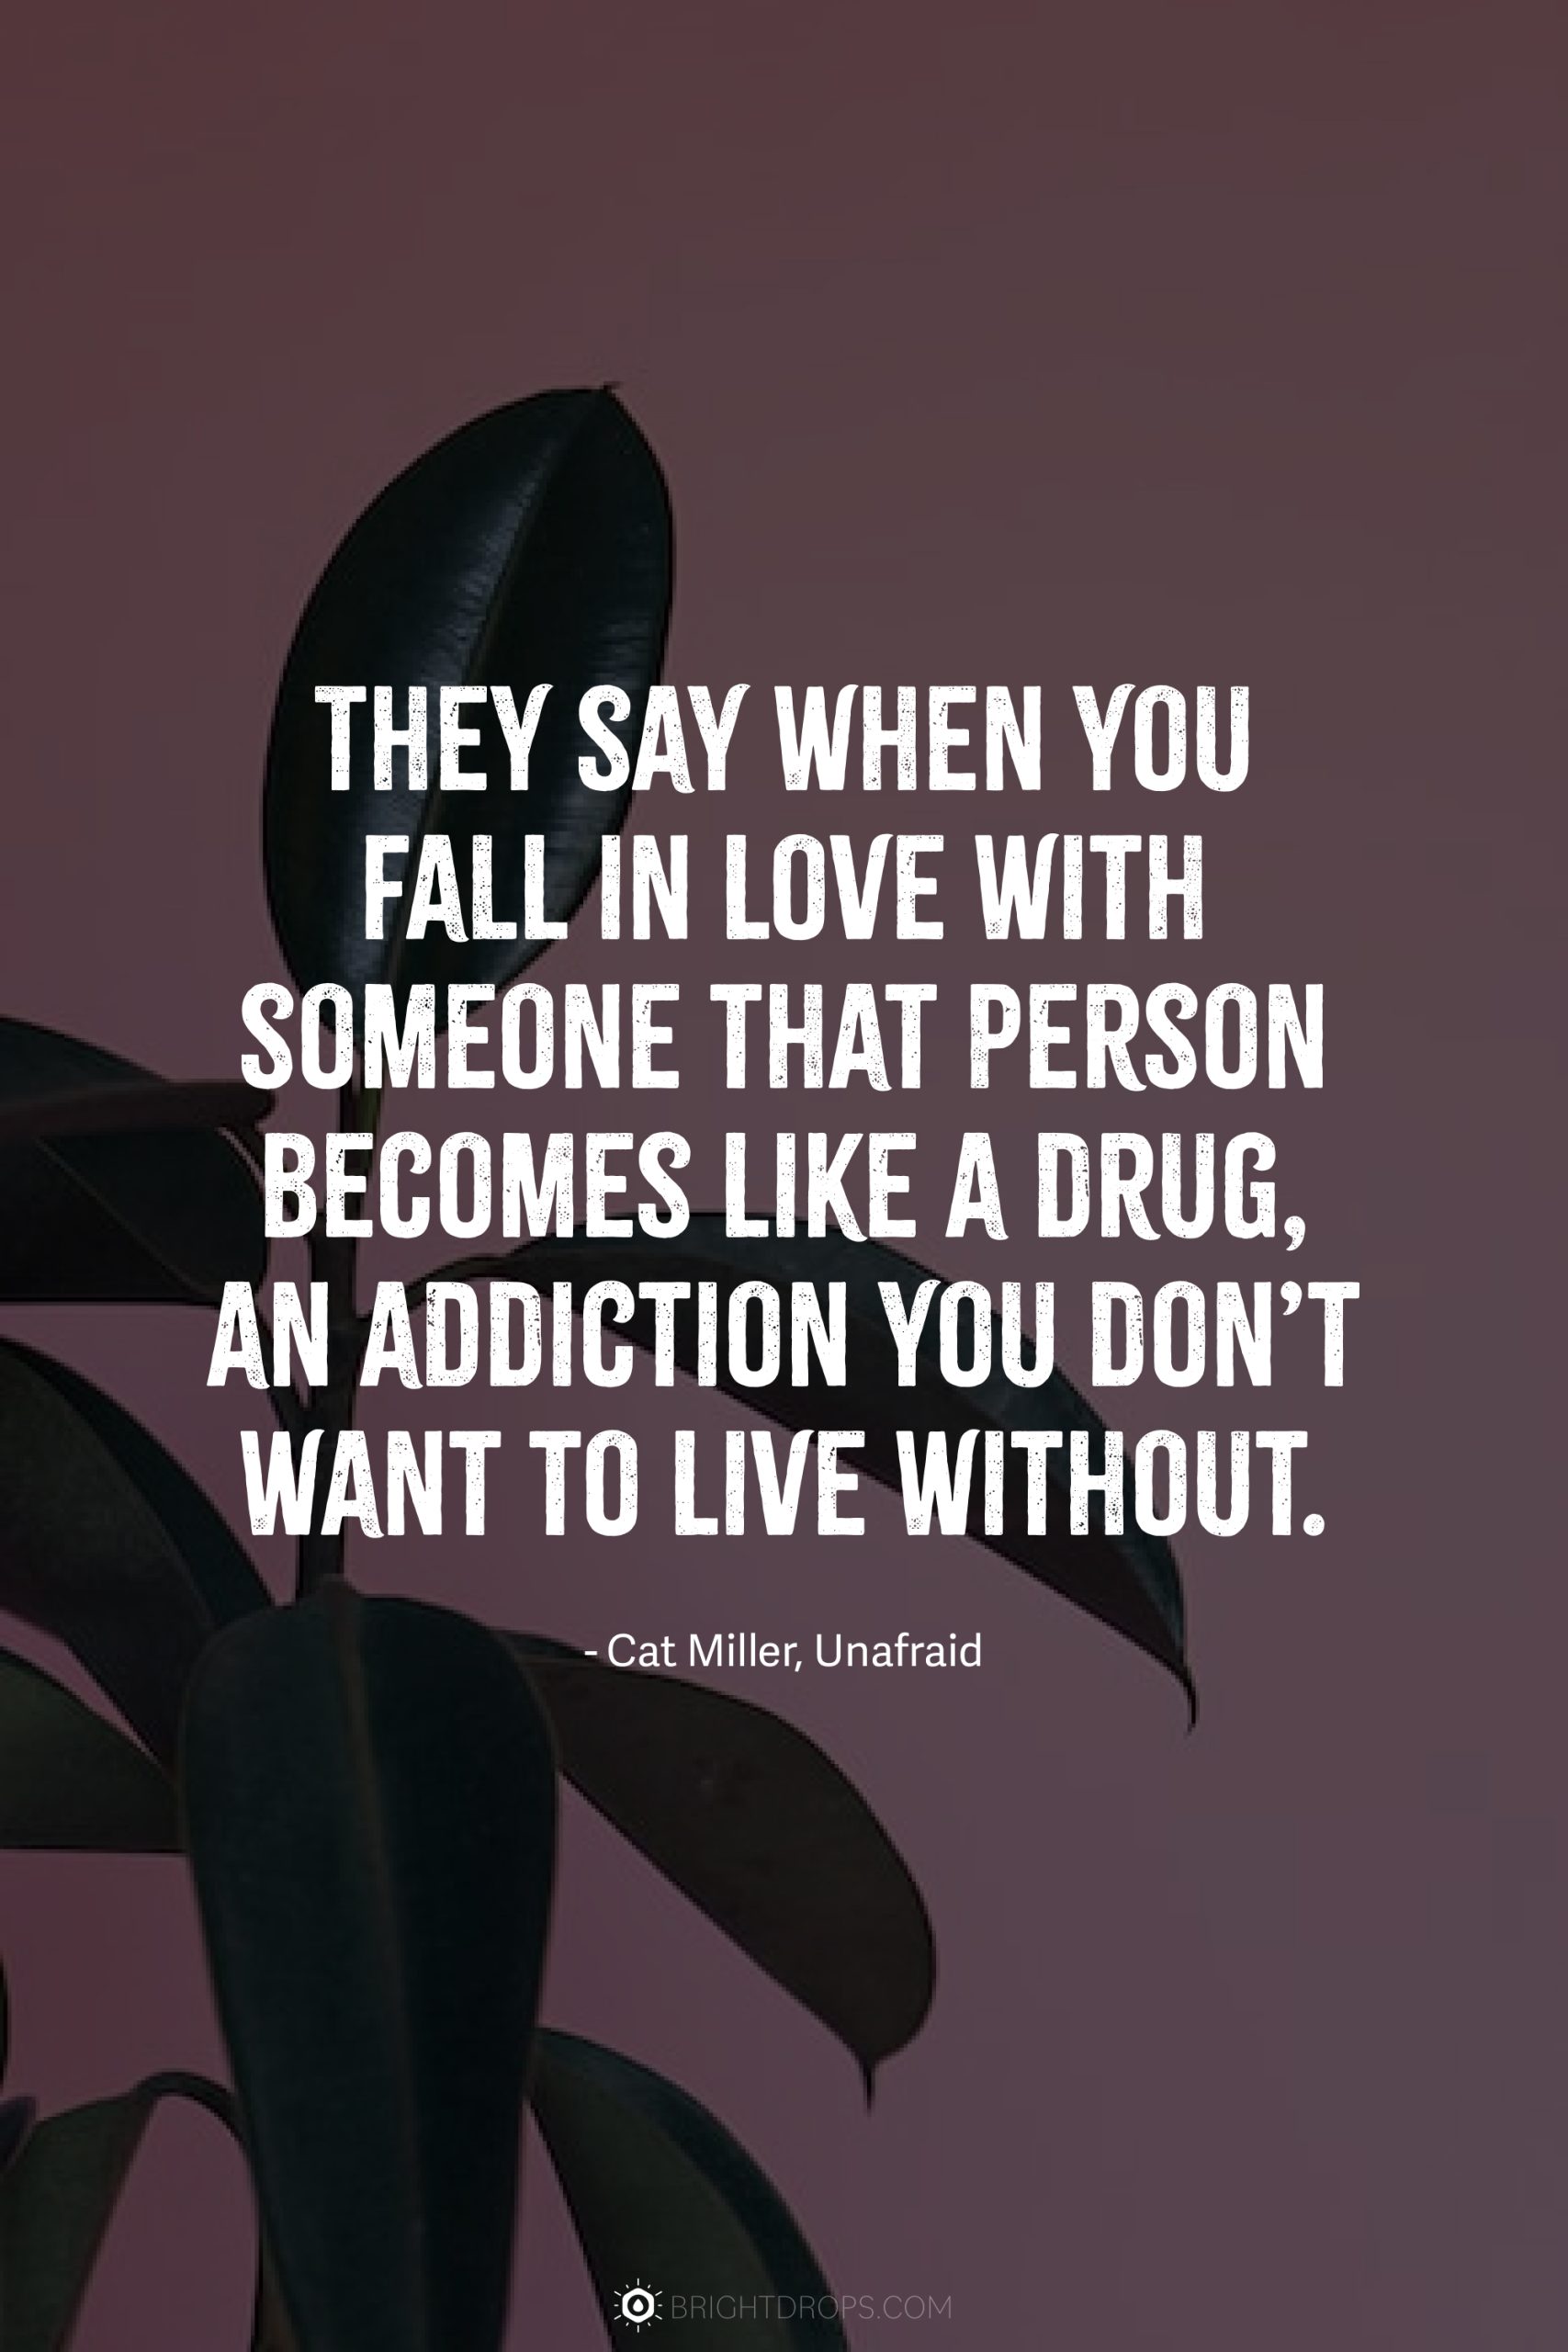 They say when you fall in love with someone that person becomes like a drug, an addiction you don’t want to live without.